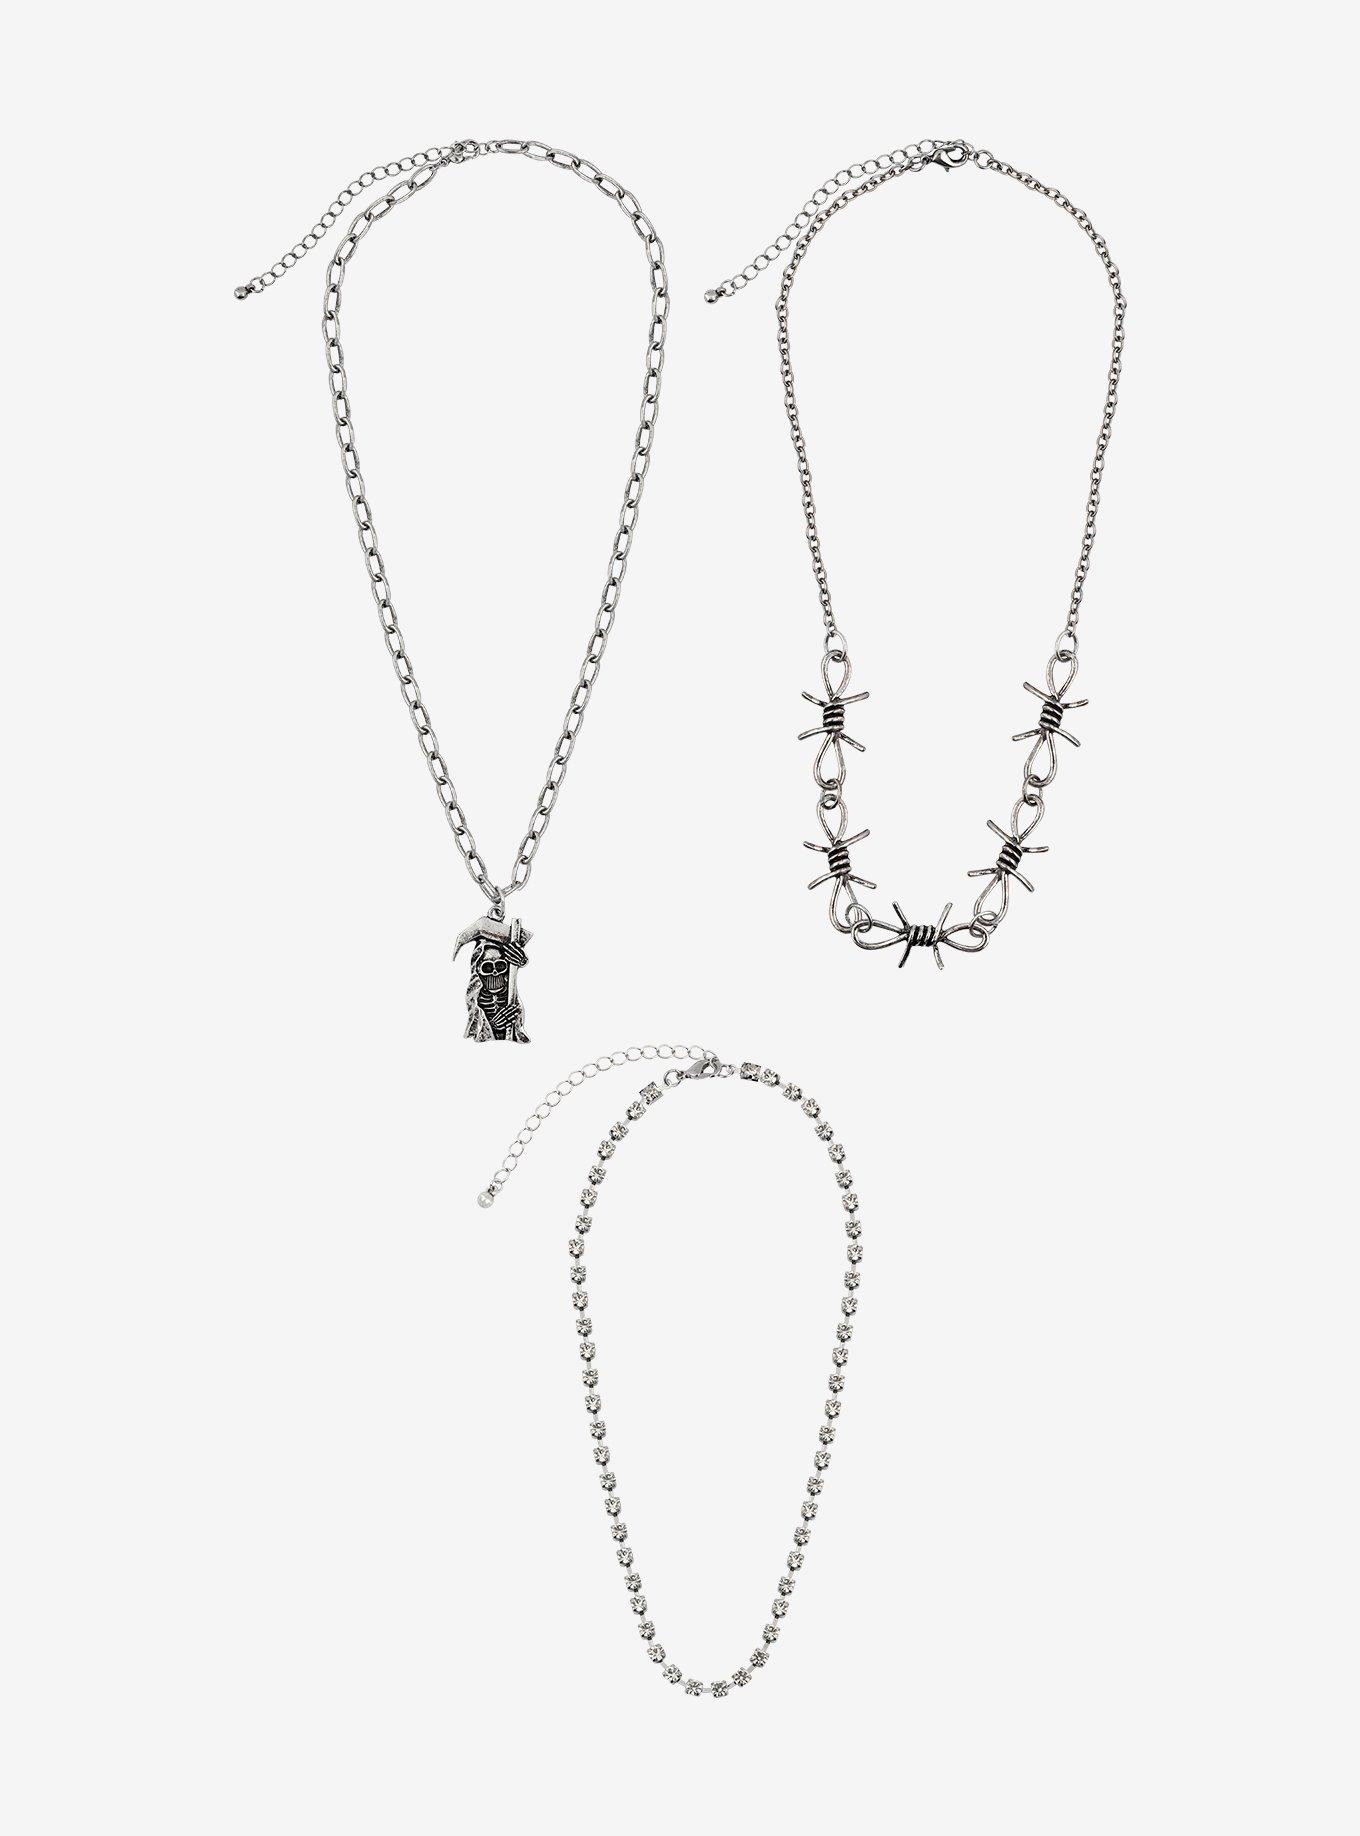 Reaper Barbed Wire Necklace Set | Hot Topic